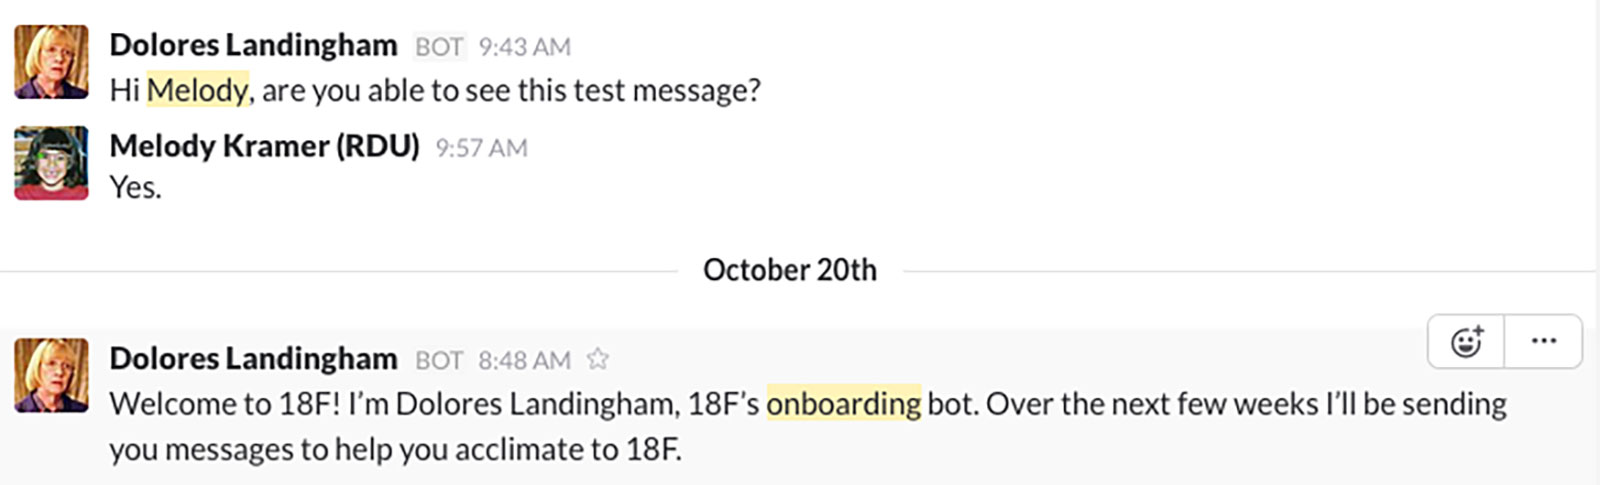 A test conversation with Mrs. Dolores Landingham, the onboarding chat bot.